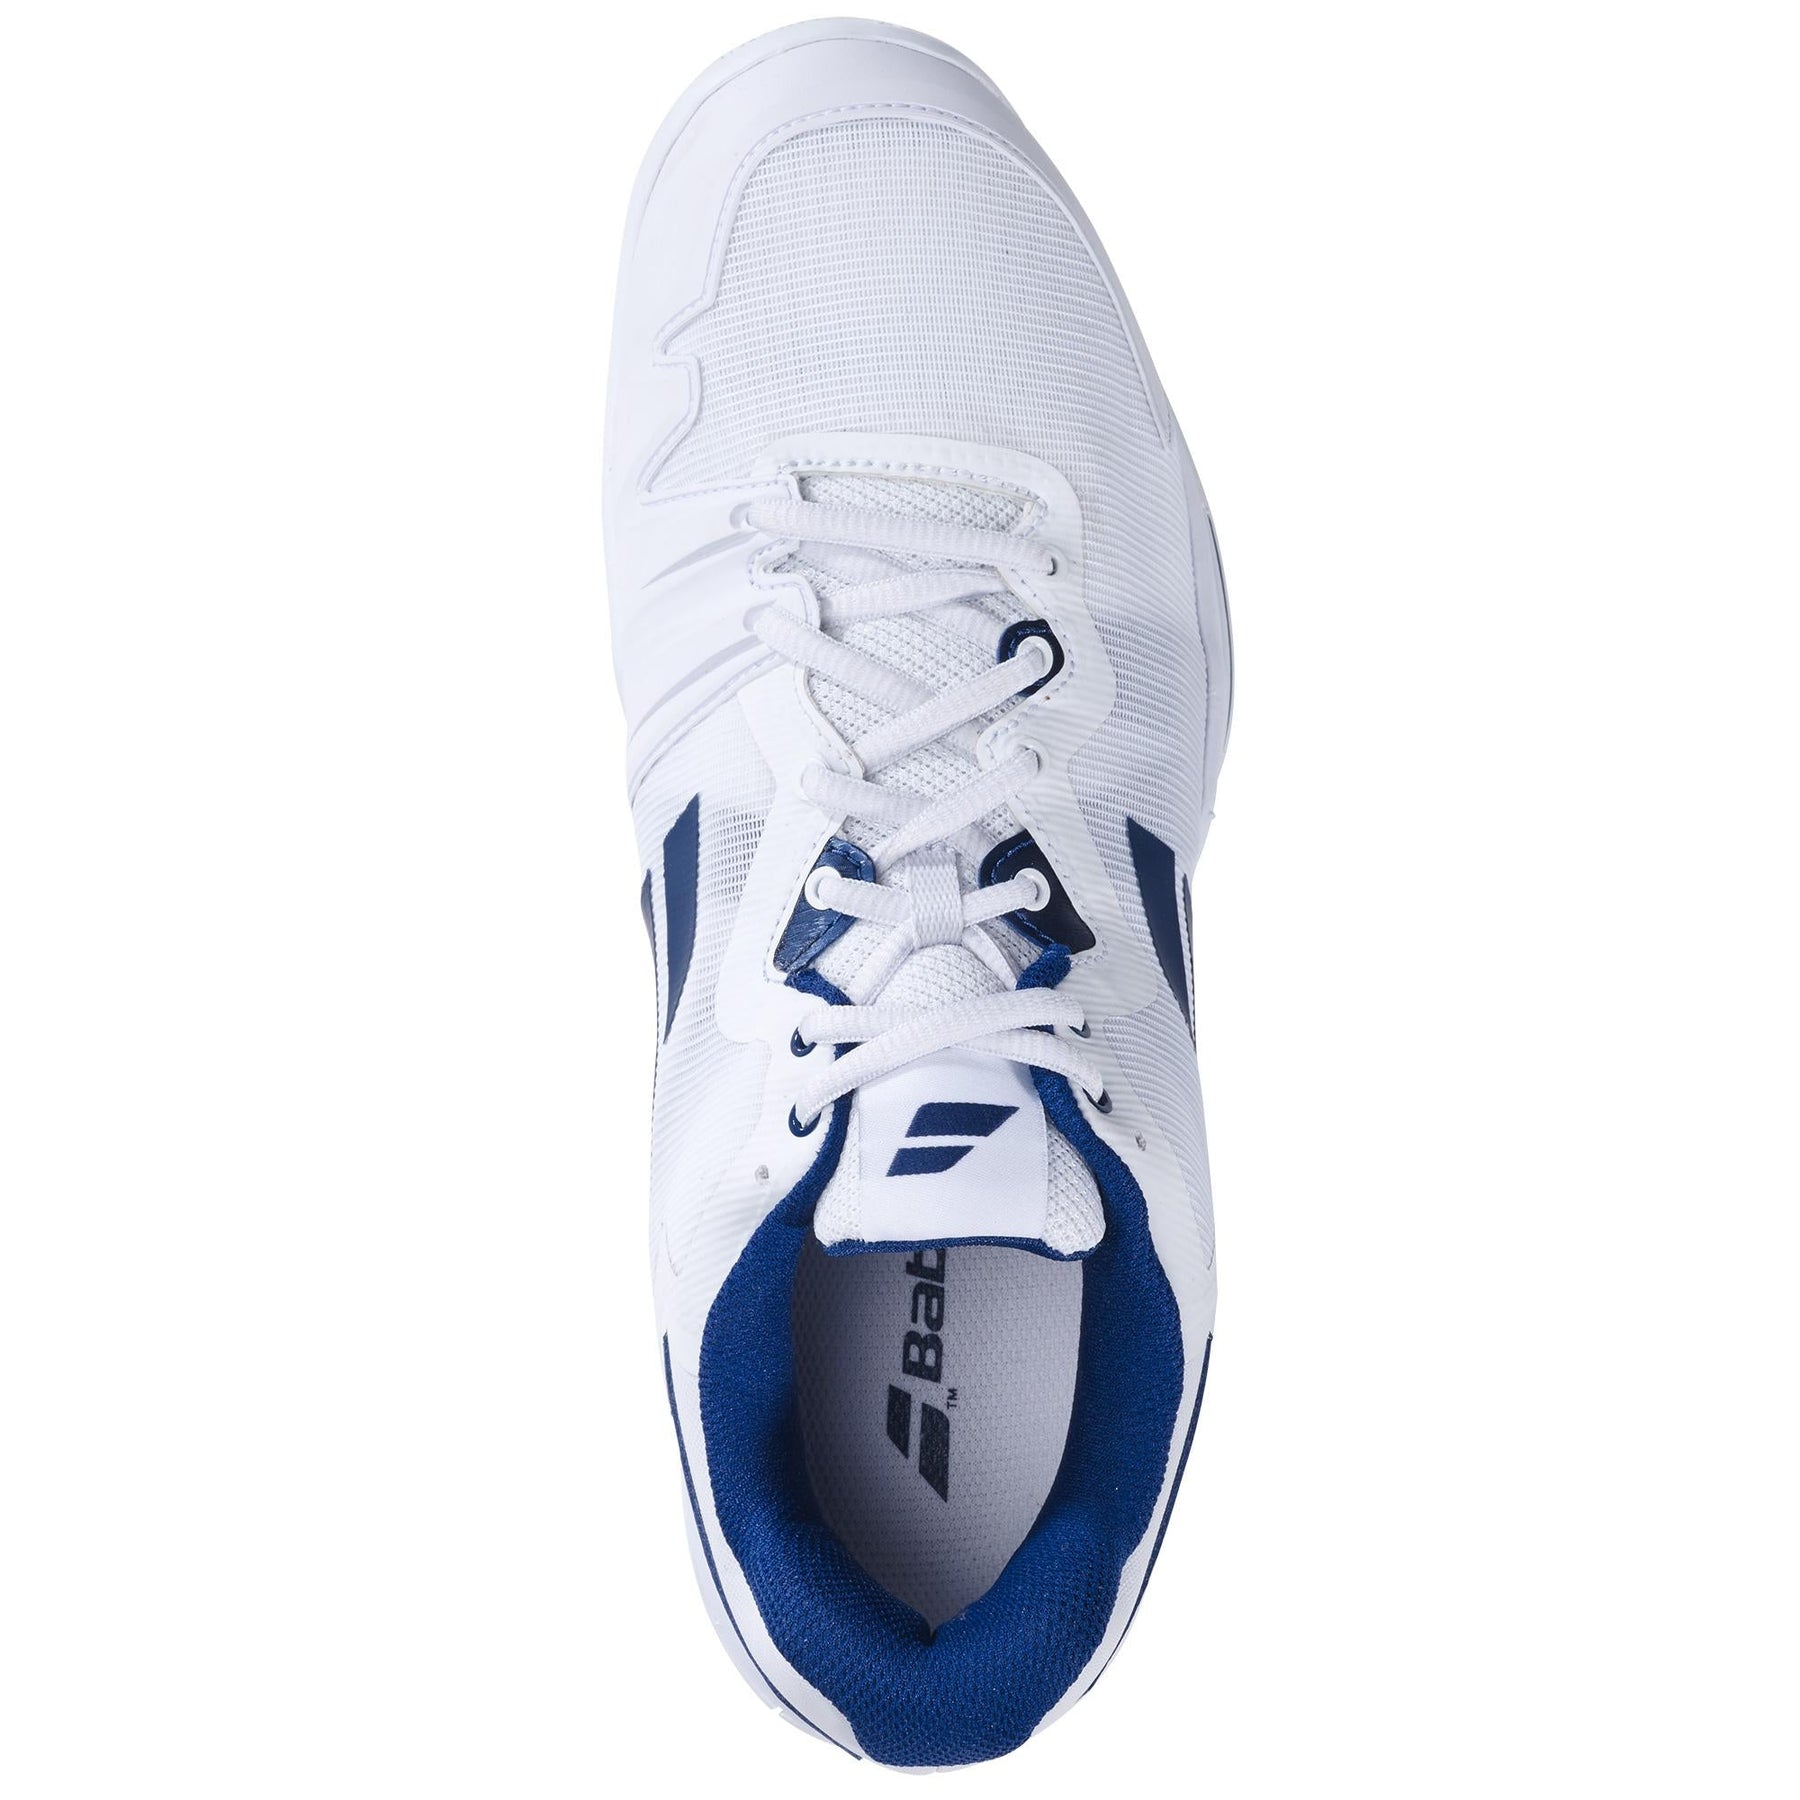 Babolat SFX3 All Court 30S23529 Tennis Shoes Mens (White/Navy)